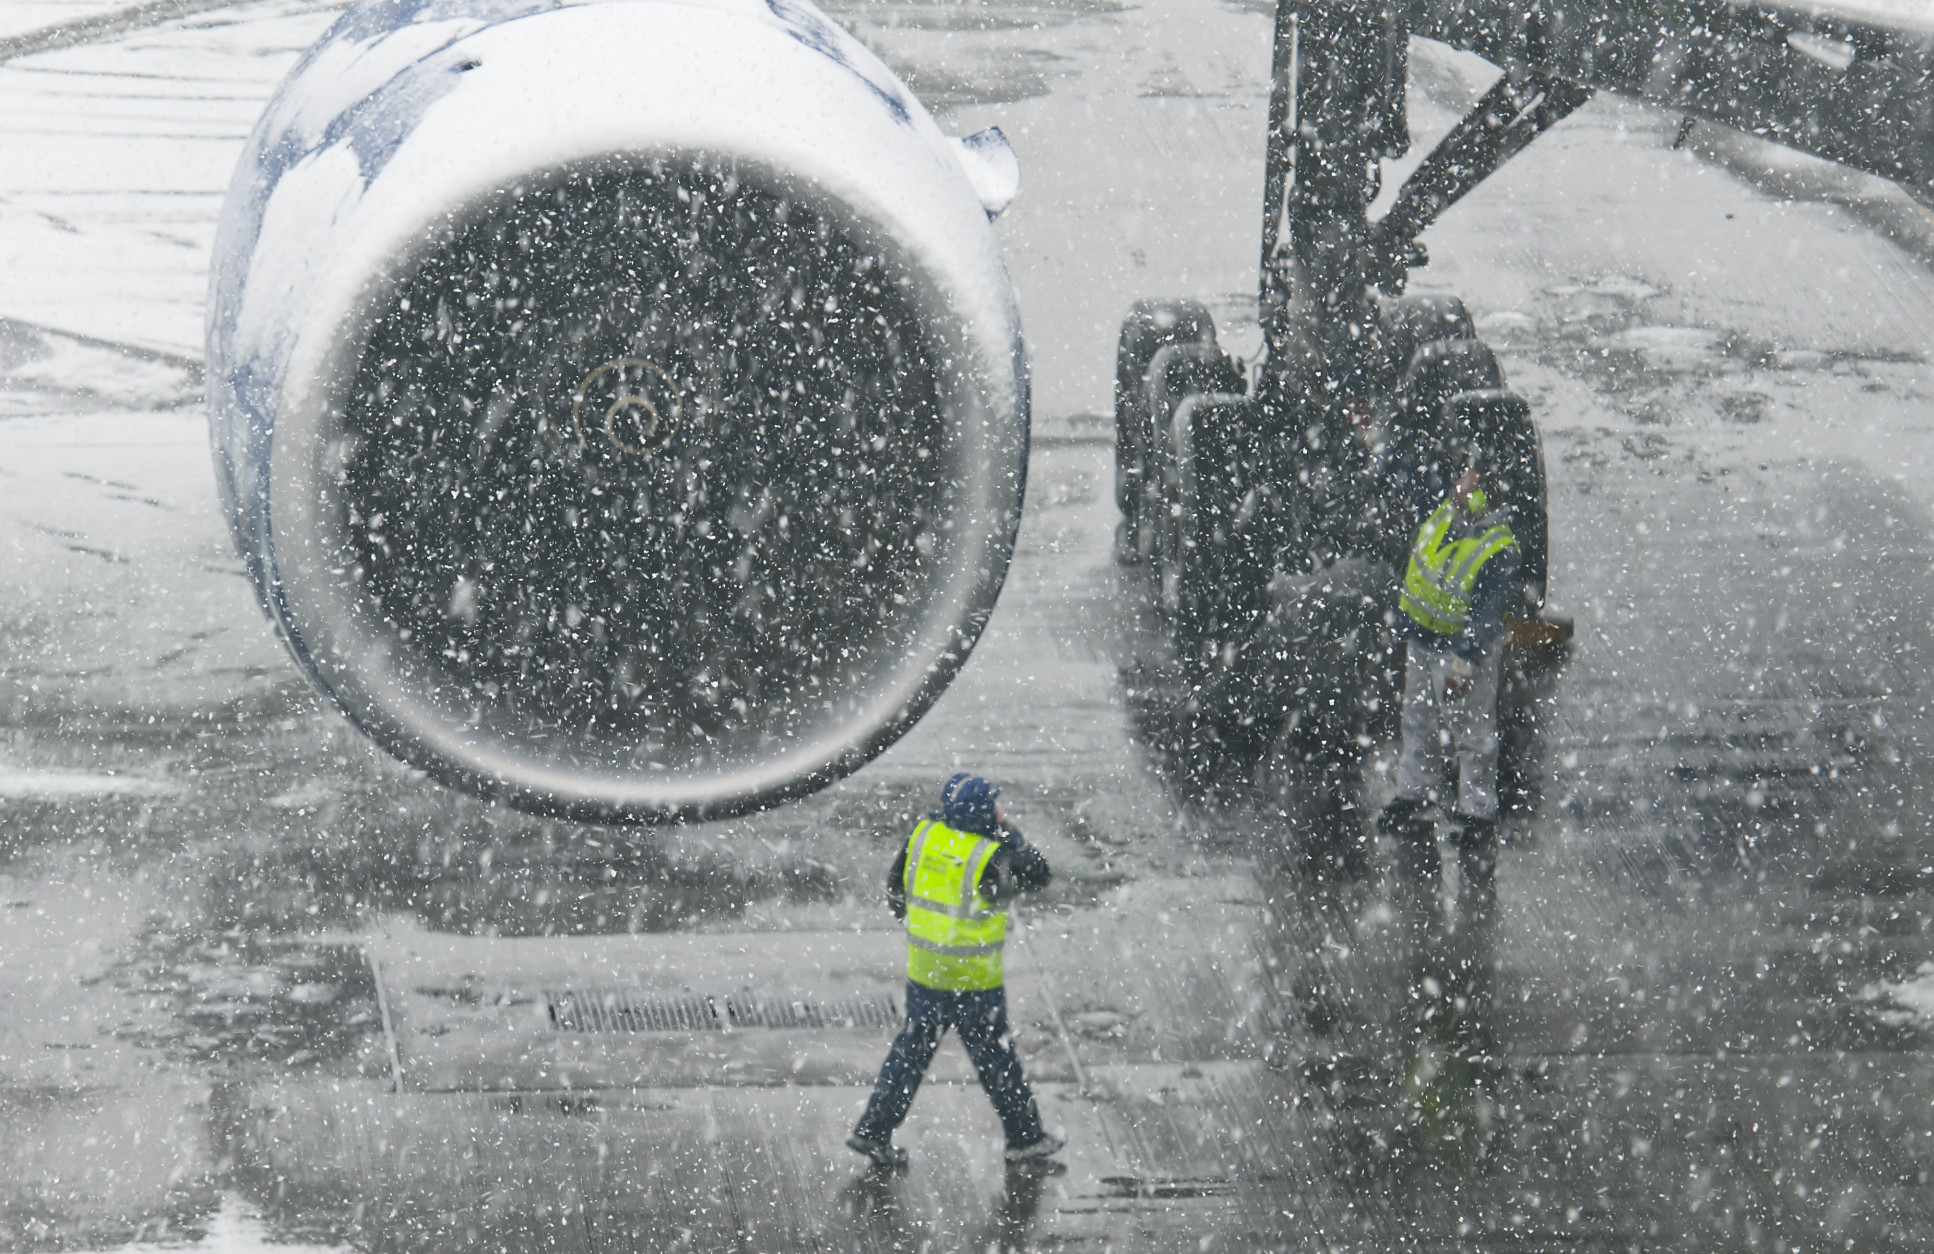 Photo of plane propeller with two airport workers during a snowstorm. Visibility is low